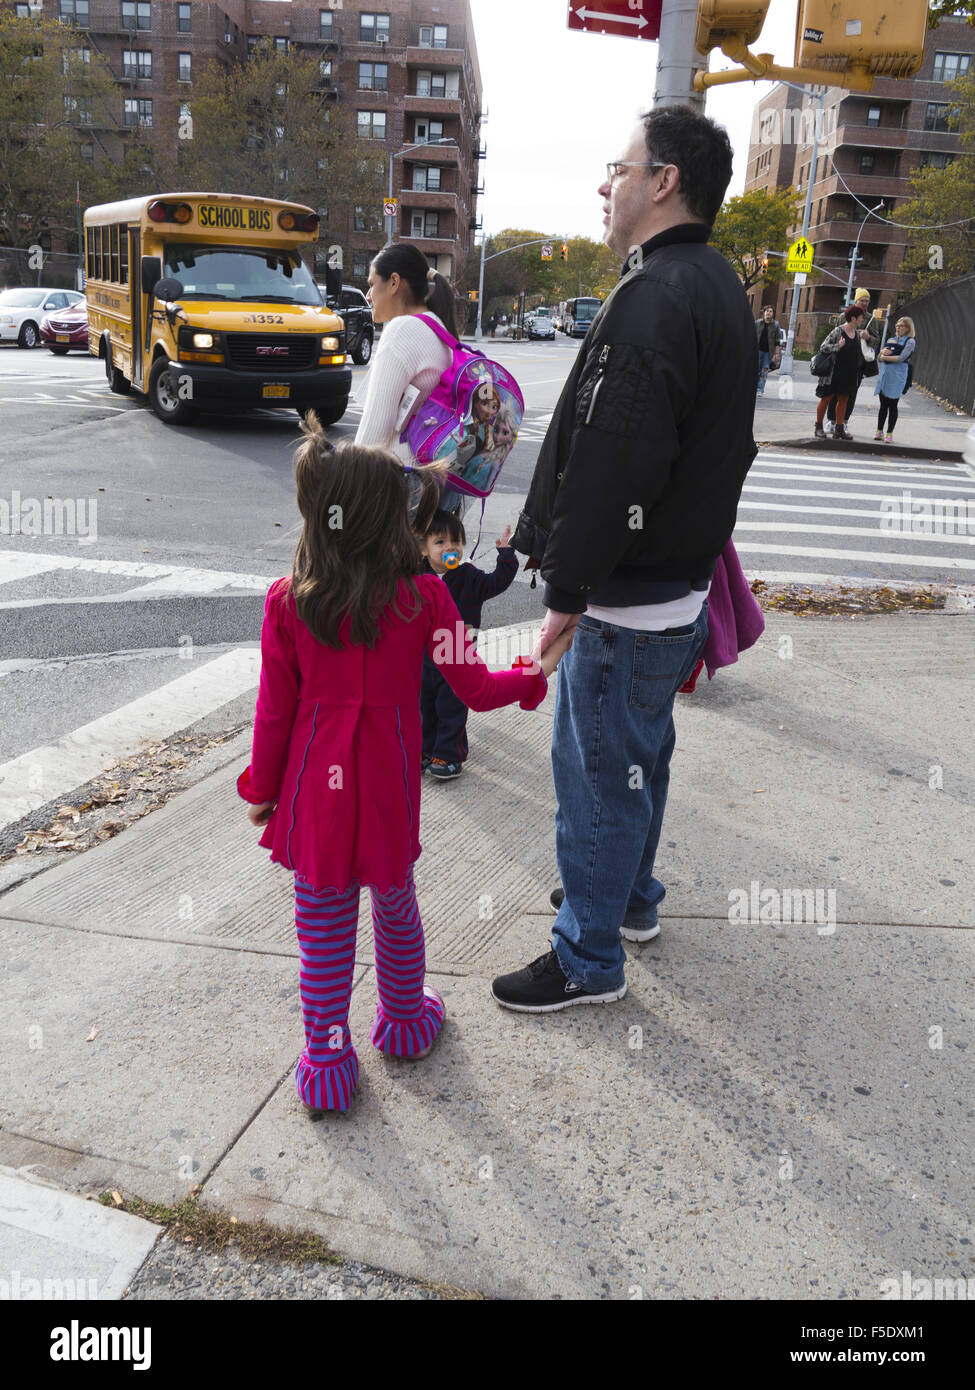 Children going home with parents after school in Kensington, Brooklyn, NY, 2015. Stock Photo